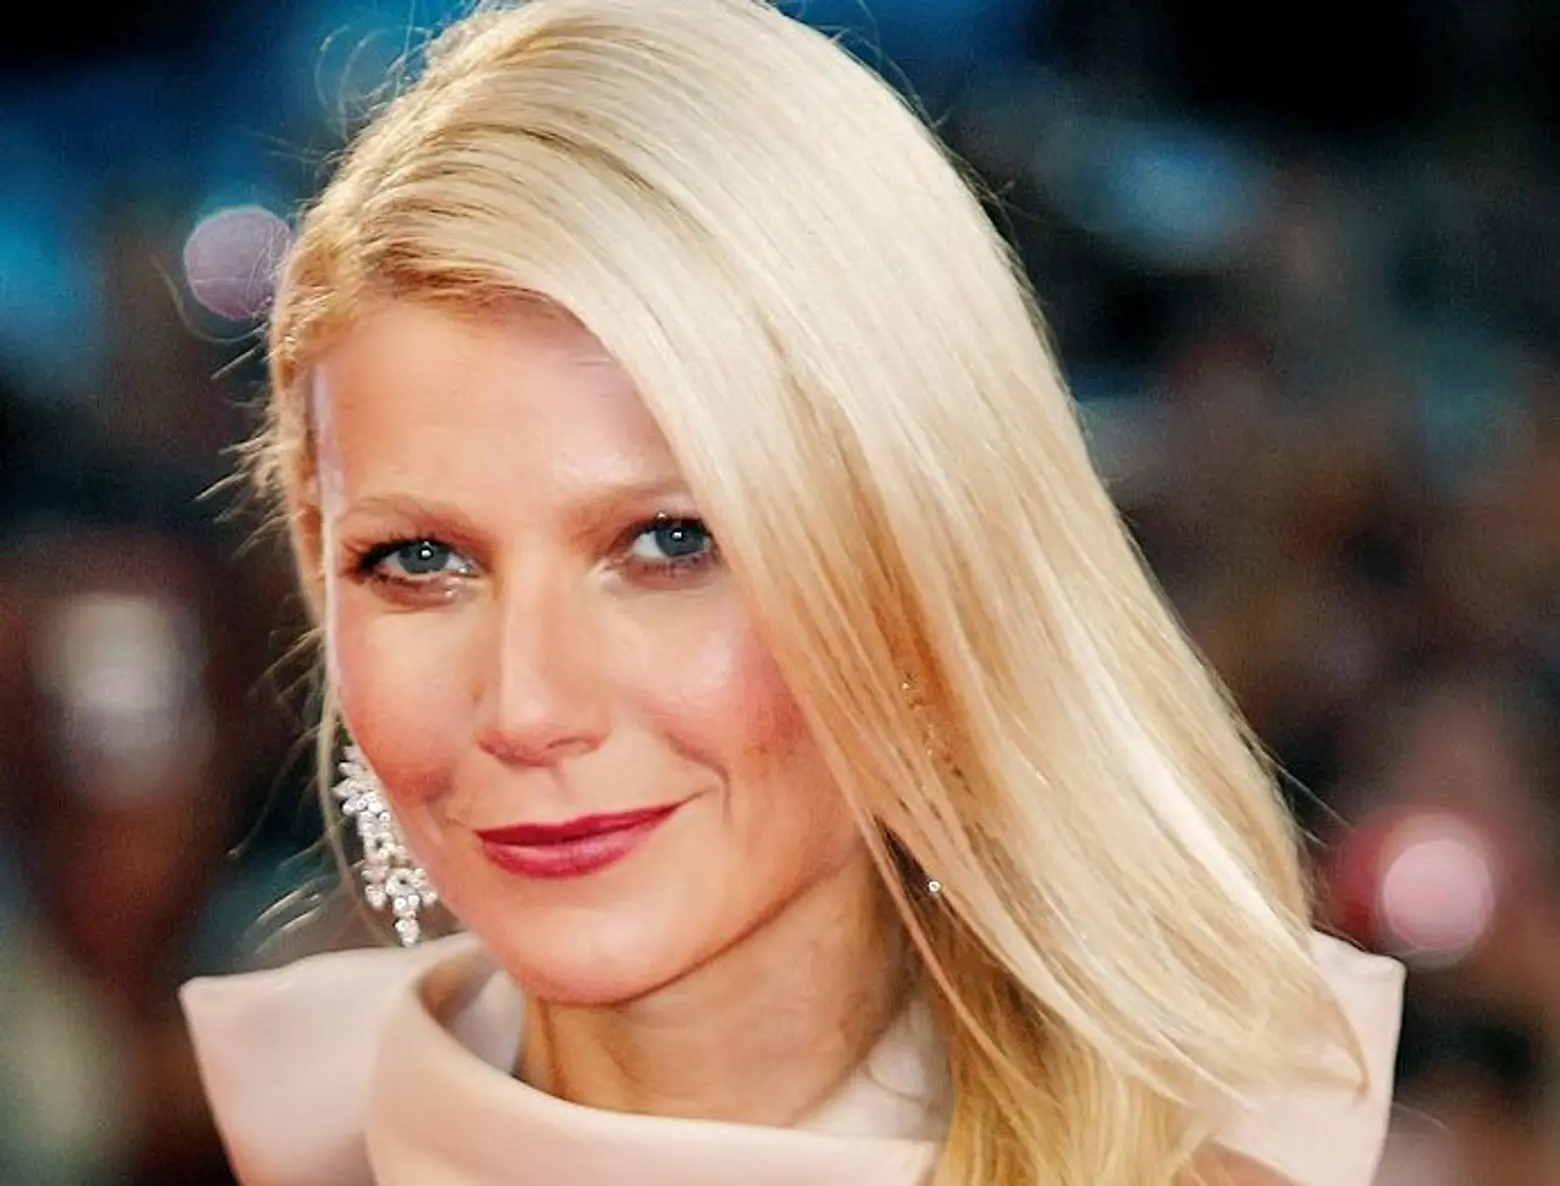 Get ‘healthy’ frosting shots at Gwyneth Paltrow’s midtown cafe; L train replacement to be announced this fall